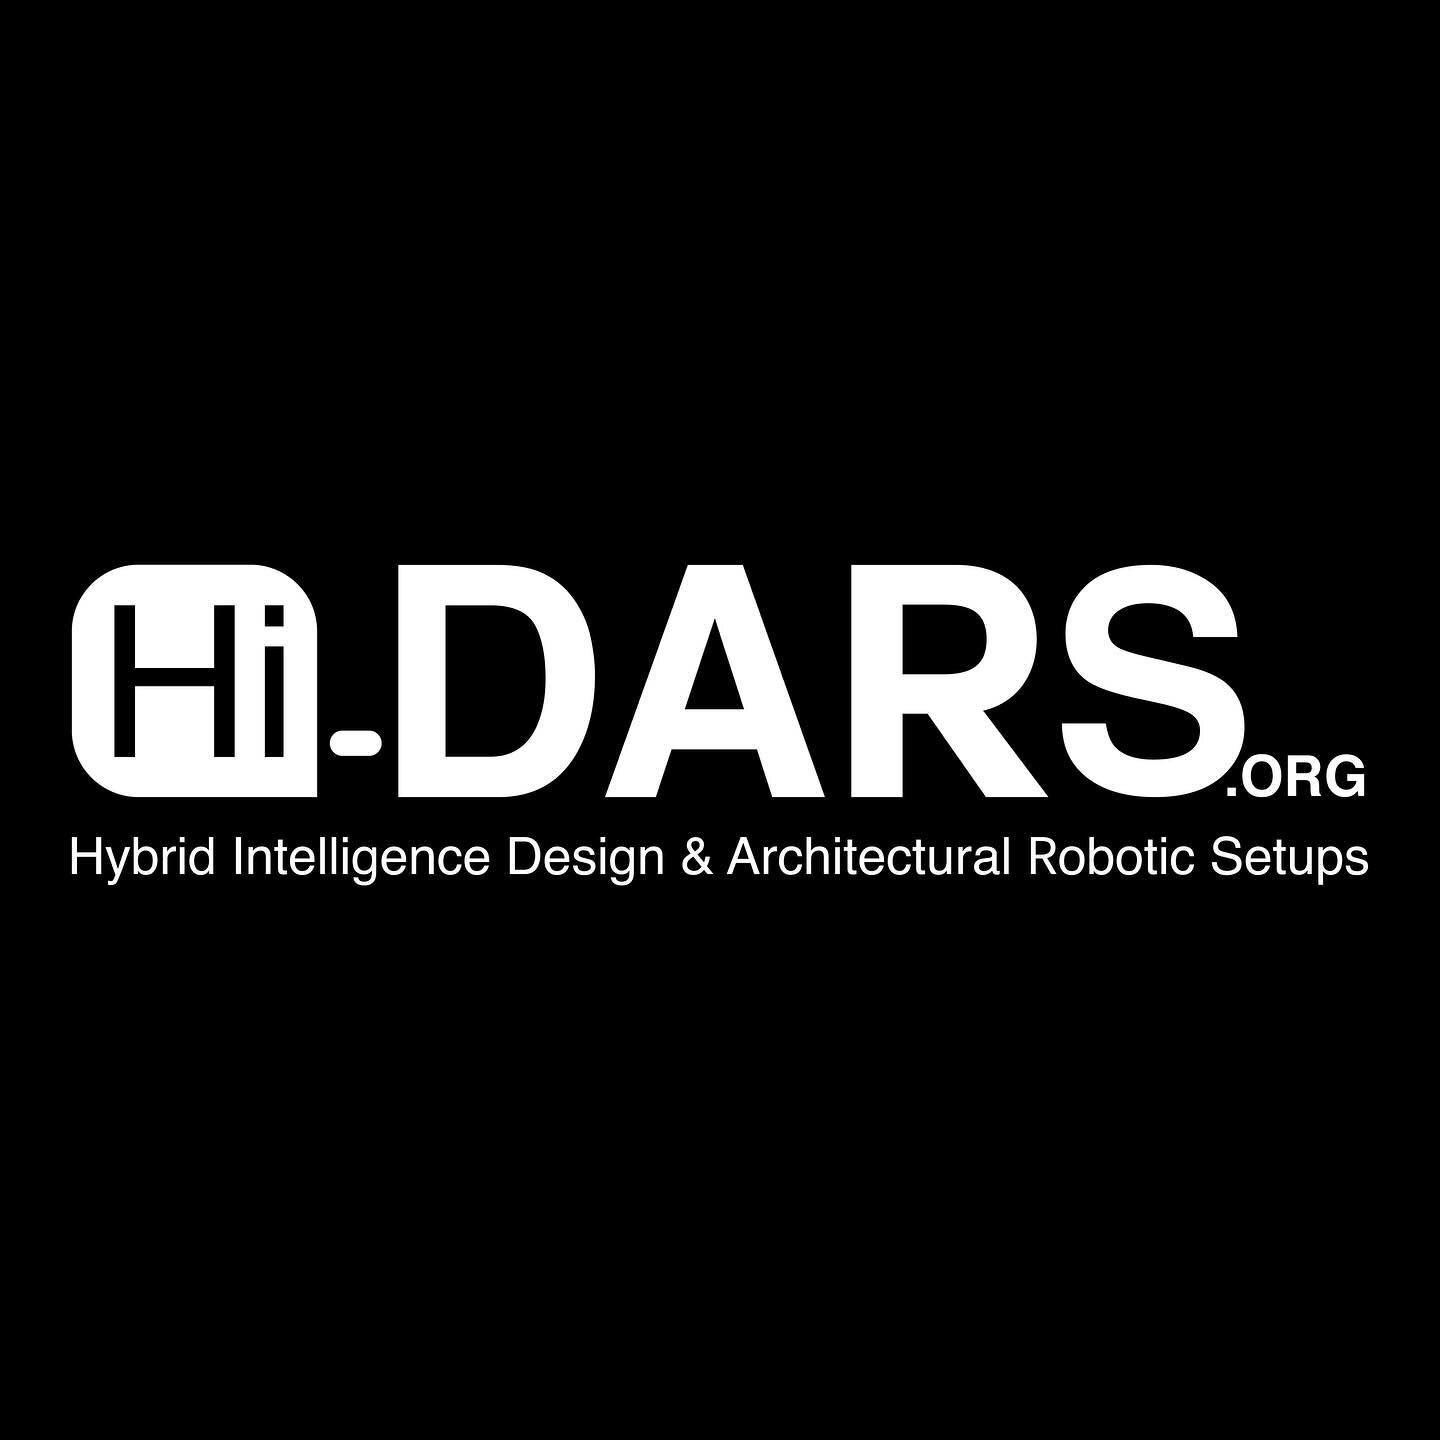 We are excited to announce the launch of the Hi-DARS lab and Hi-DARS.org website! 

 
The Hi-DARS lab (Hybrid Intelligence Design and Architectural Robotic Setups) is a design research hub committed to leading the integration and advancement of Hybri